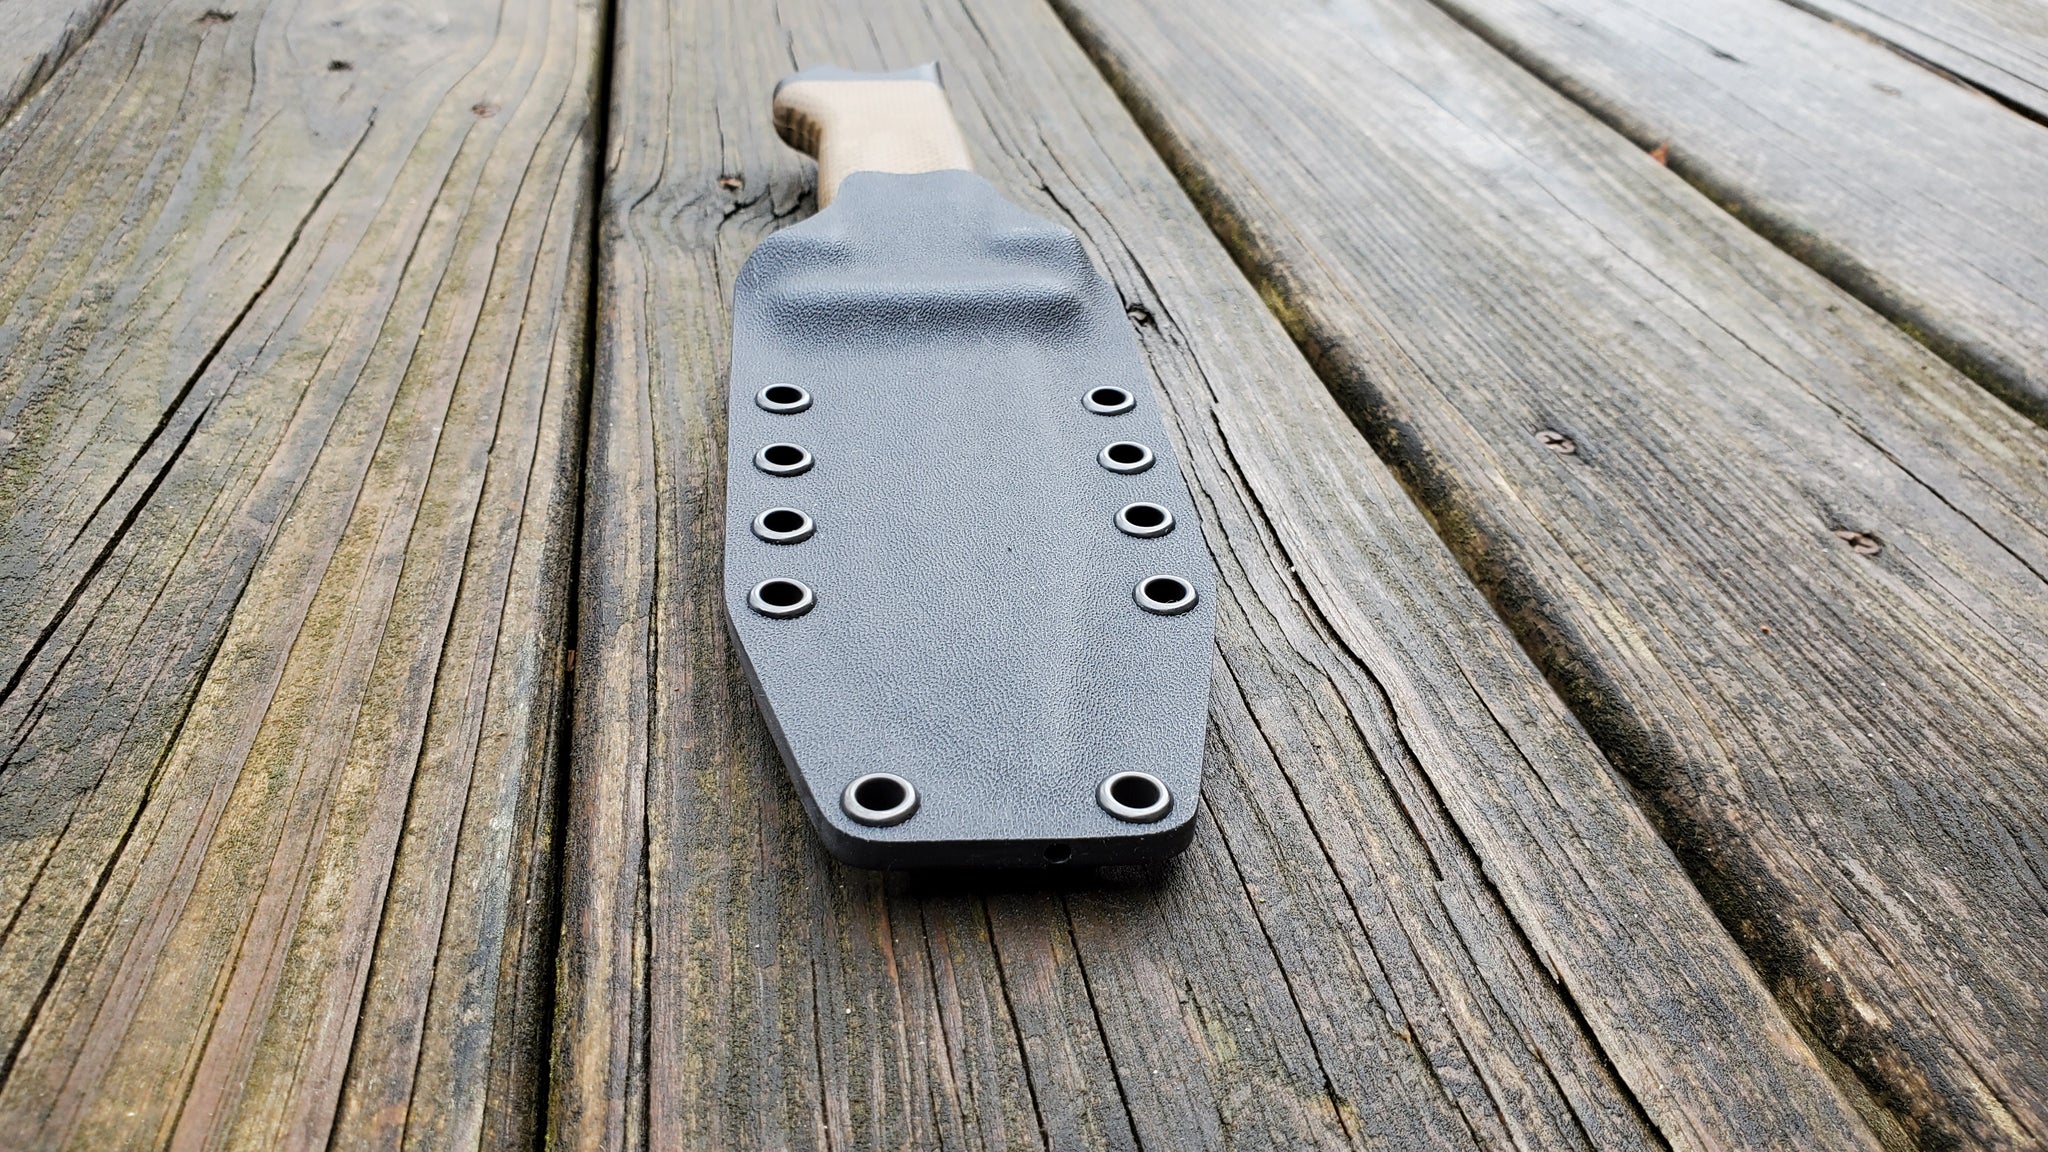 Gerber " LMF II" Infantry survival style Kydex Sheath (sheath only)